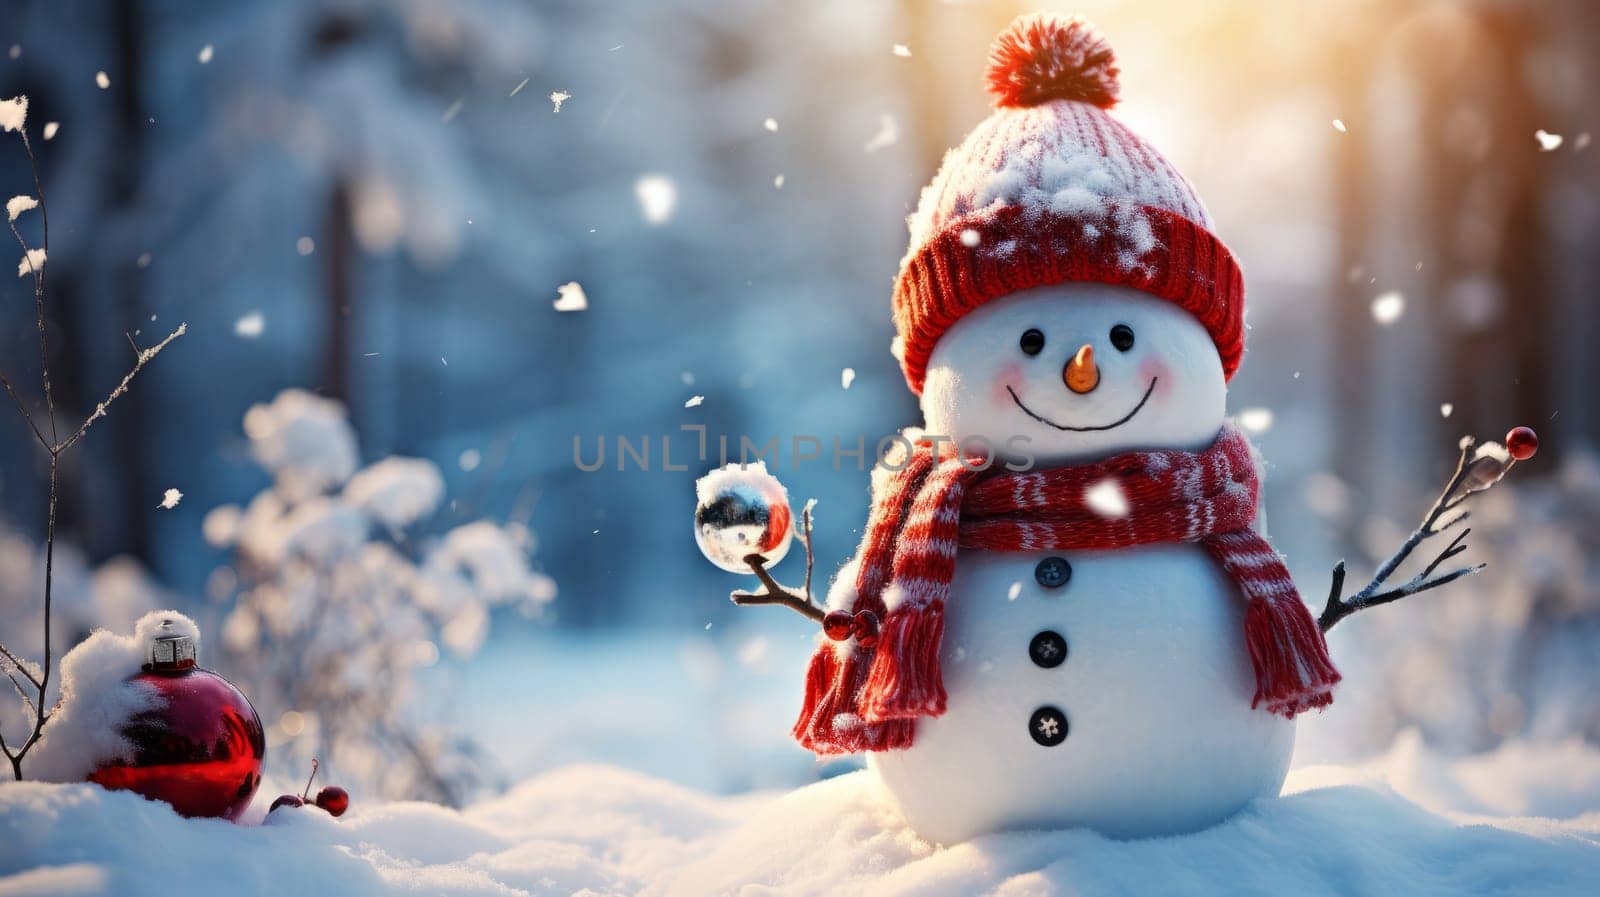 Cute snowman on a snowy street as a symbol of the winter holidays, AI by but_photo